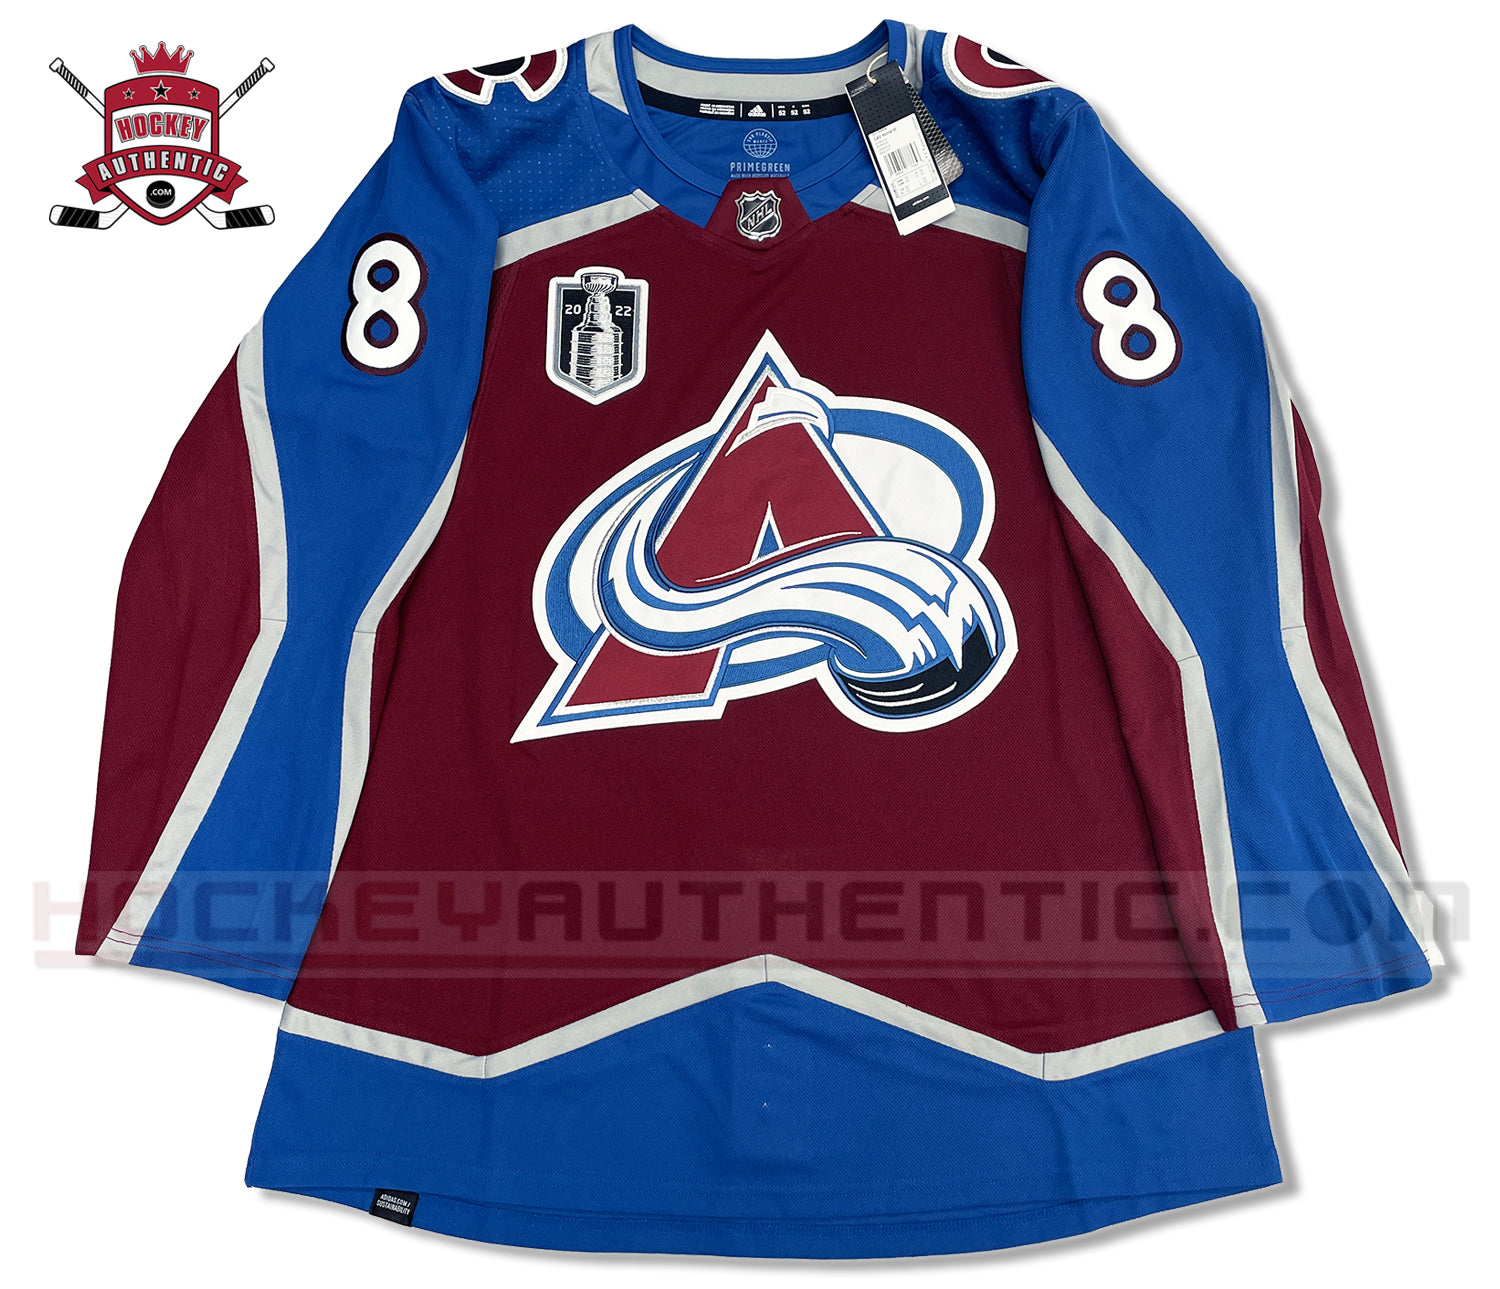 Avalanche Stanley Cup shirts, buy yours now